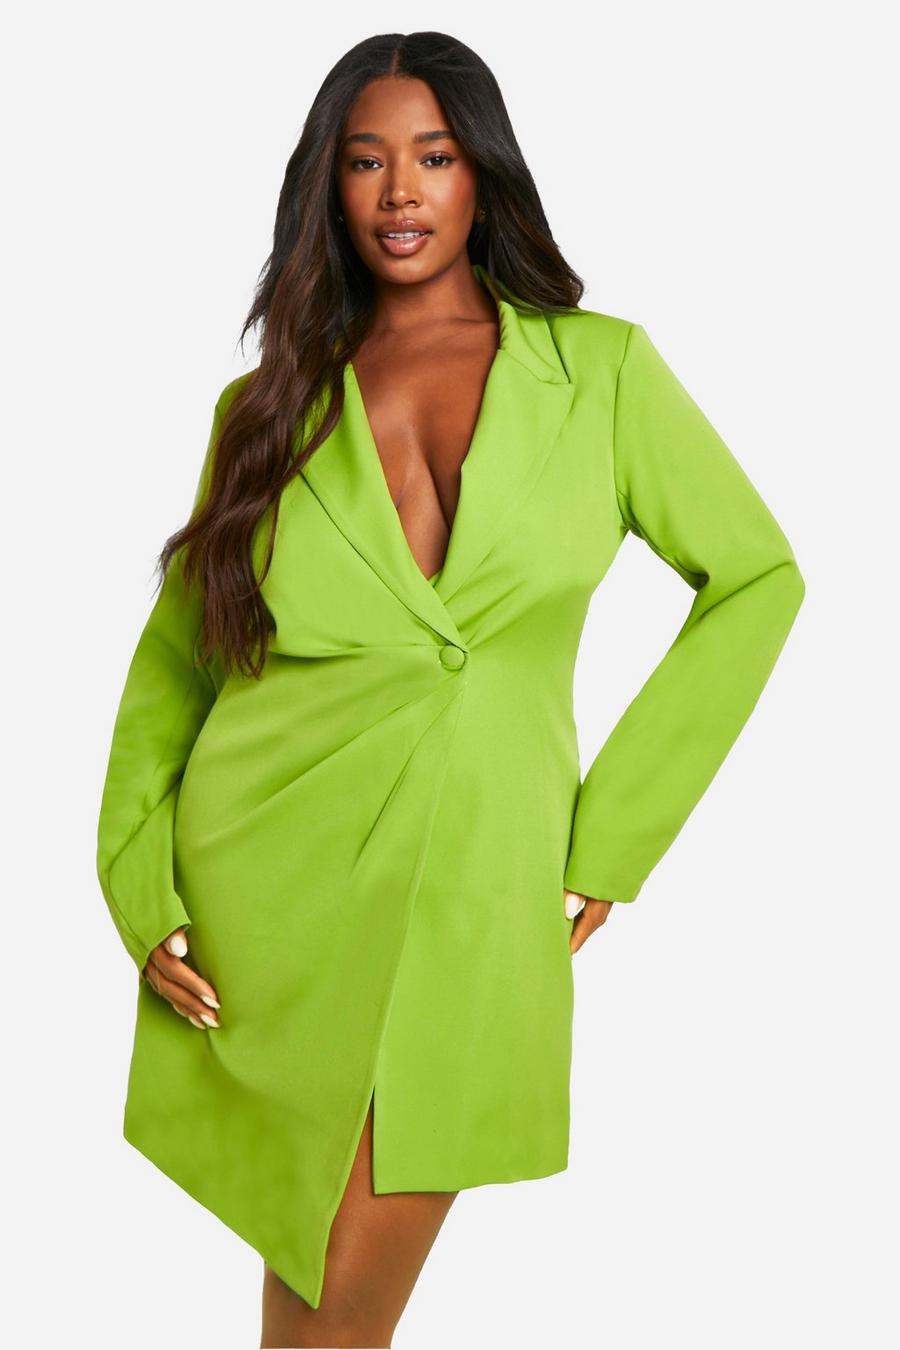 Lime All Occasion Dresses